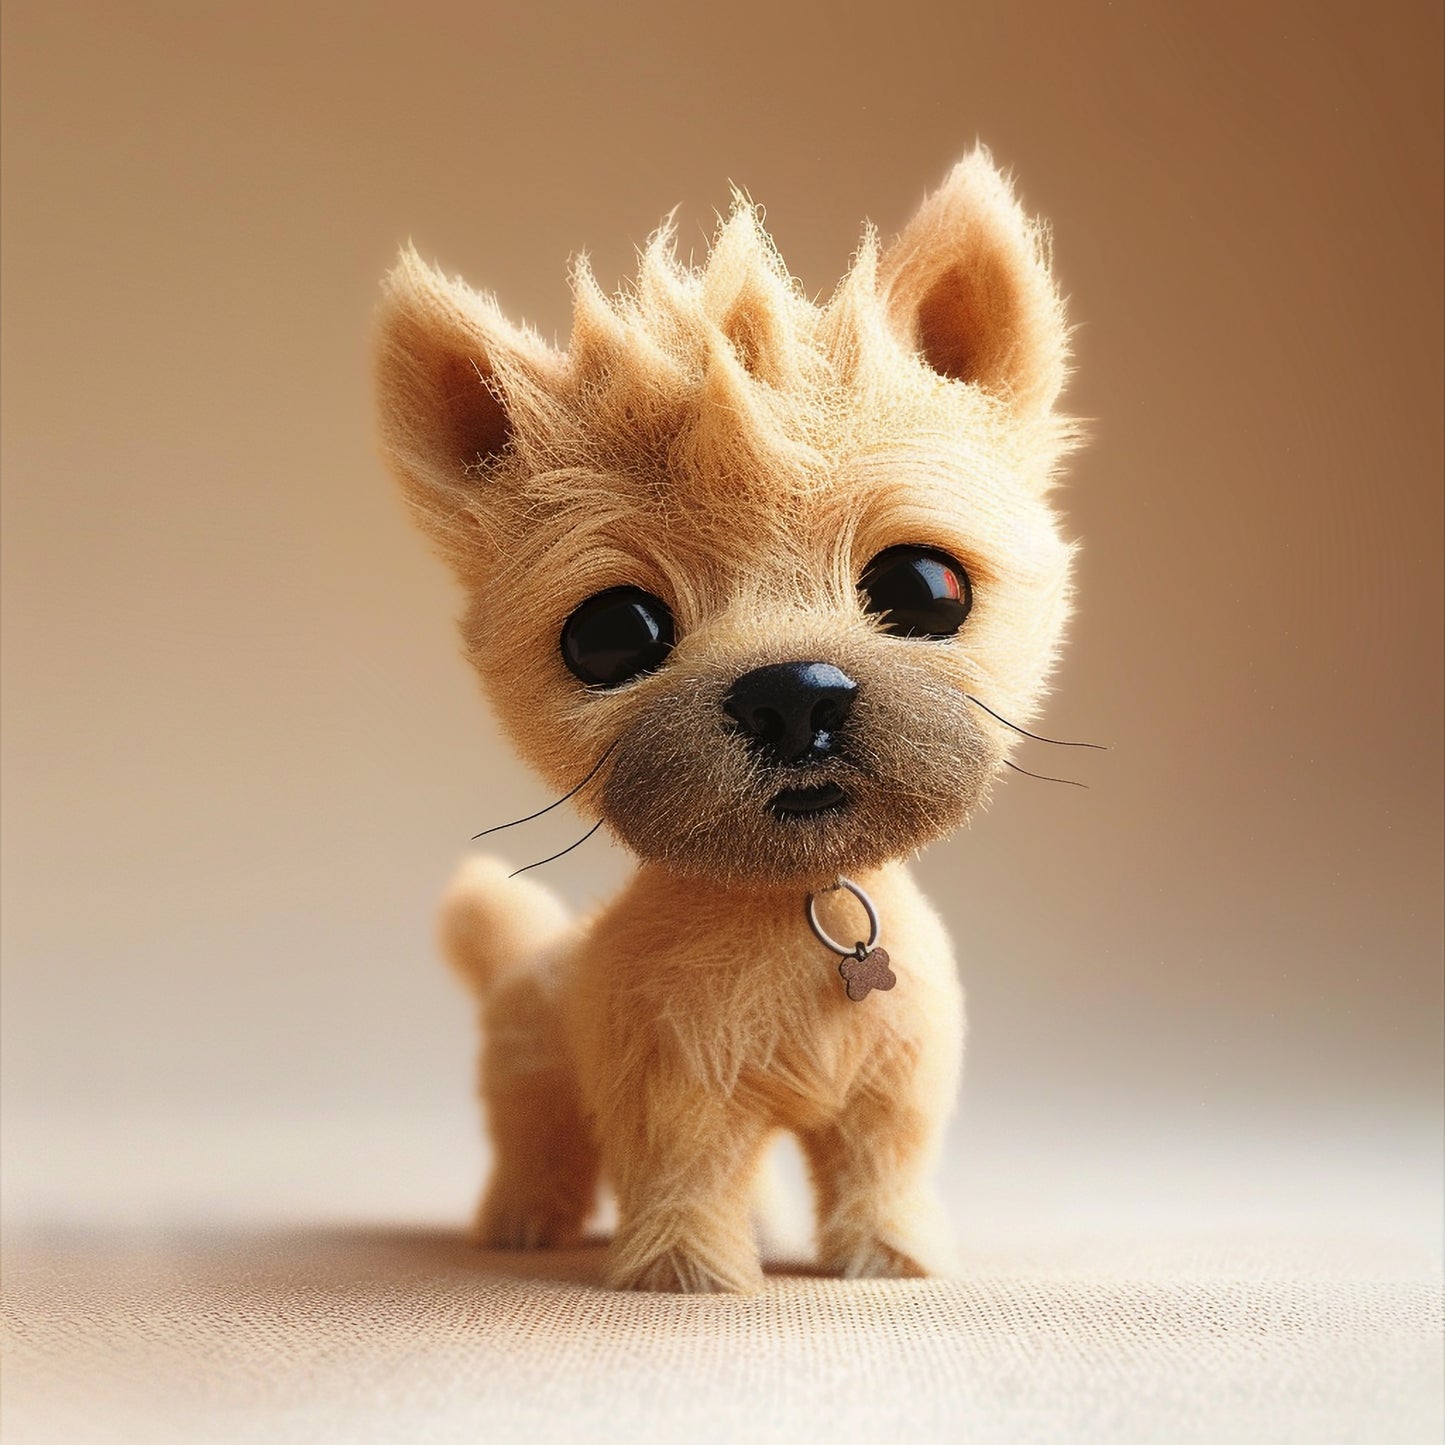 Adorable Cairn Terrier Puppy with Cute Expression